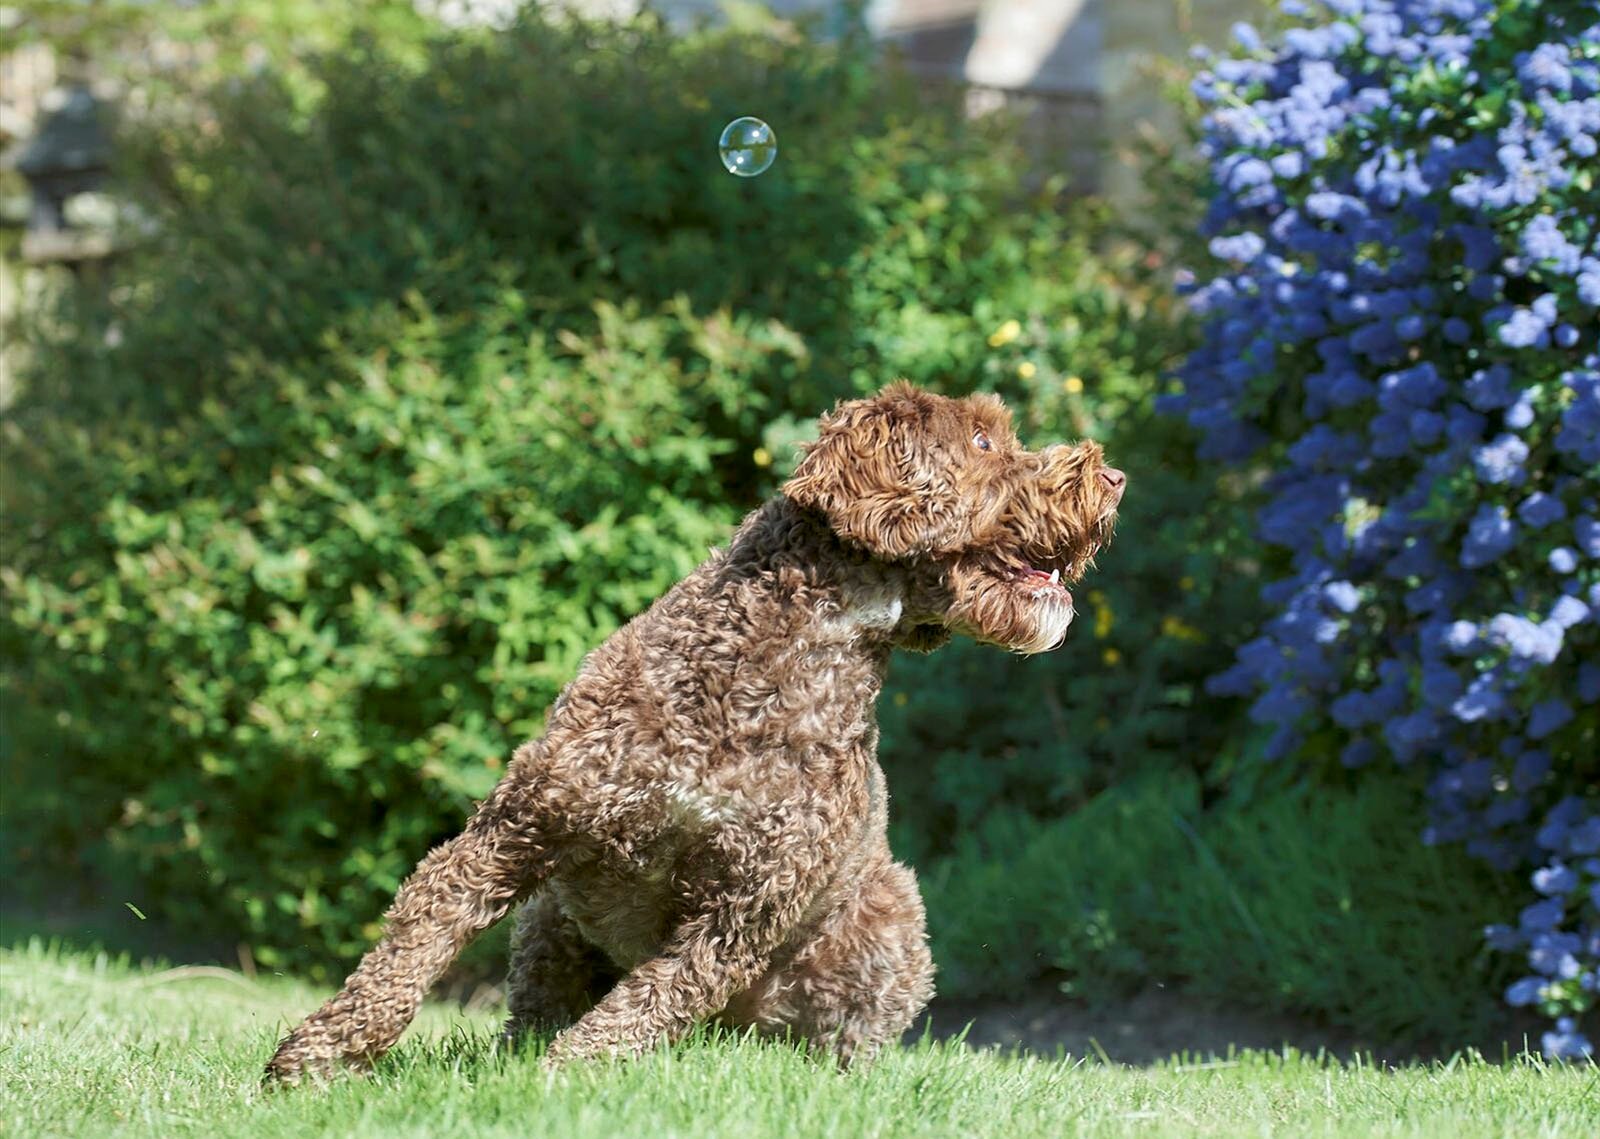 A brown curly-haired dog chasing a transparent bubble in a sunny garden with vibrant blue flowers in the background.